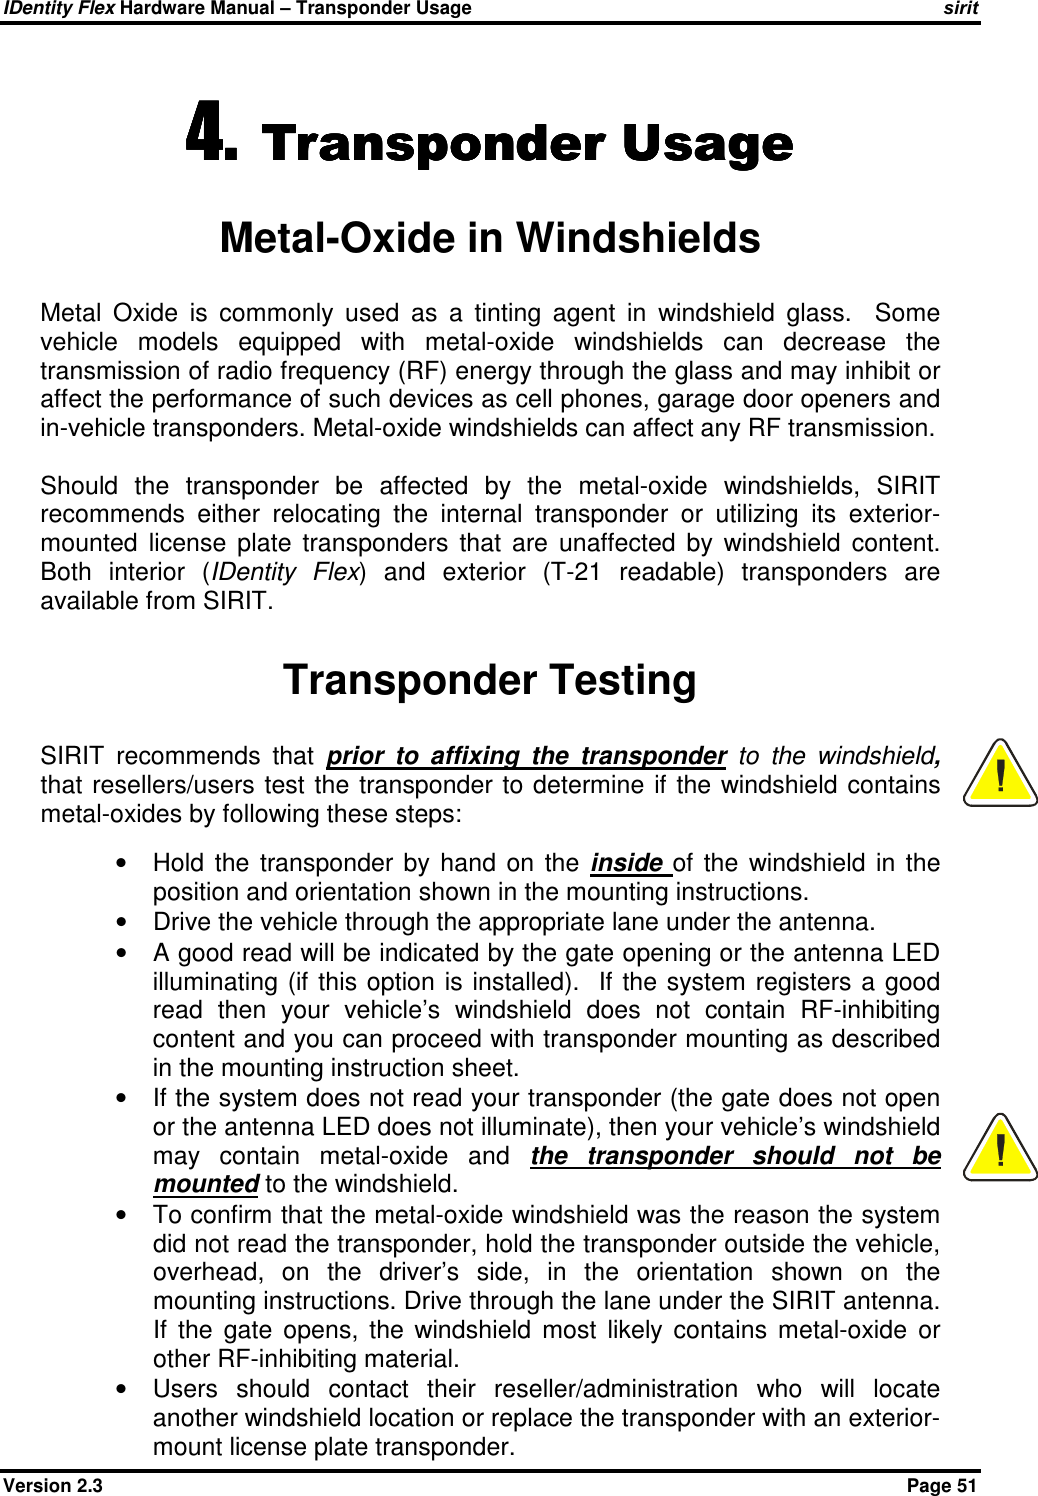 IDentity Flex Hardware Manual – Transponder Usage   sirit Version 2.3    Page 51 4.4.4.4. Transponder UsageTransponder UsageTransponder UsageTransponder Usage    Metal-Oxide in Windshields Metal  Oxide  is  commonly  used  as  a  tinting  agent  in  windshield  glass.    Some vehicle  models  equipped  with  metal-oxide  windshields  can  decrease  the transmission of radio frequency (RF) energy through the glass and may inhibit or affect the performance of such devices as cell phones, garage door openers and in-vehicle transponders. Metal-oxide windshields can affect any RF transmission.  Should  the  transponder  be  affected  by  the  metal-oxide  windshields,  SIRIT recommends  either  relocating  the  internal  transponder  or  utilizing  its  exterior-mounted  license  plate  transponders  that  are  unaffected  by  windshield  content. Both  interior  (IDentity  Flex)  and  exterior  (T-21  readable)  transponders  are available from SIRIT.  Transponder Testing SIRIT  recommends  that  prior  to  affixing  the  transponder  to  the  windshield, that  resellers/users test the transponder to determine if  the windshield contains metal-oxides by following these steps:  •  Hold  the  transponder  by  hand  on  the  inside  of  the  windshield  in  the position and orientation shown in the mounting instructions. •  Drive the vehicle through the appropriate lane under the antenna. •  A good read will be indicated by the gate opening or the antenna LED illuminating (if  this option  is installed).   If the  system registers  a good read  then  your  vehicle’s  windshield  does  not  contain  RF-inhibiting content and you can proceed with transponder mounting as described in the mounting instruction sheet. •  If the system does not read your transponder (the gate does not open or the antenna LED does not illuminate), then your vehicle’s windshield may  contain  metal-oxide  and  the  transponder  should  not  be mounted to the windshield. •  To confirm that the metal-oxide windshield was the reason the system did not read the transponder, hold the transponder outside the vehicle, overhead,  on  the  driver’s  side,  in  the  orientation  shown  on  the mounting instructions. Drive through the lane under the SIRIT antenna. If  the  gate  opens,  the  windshield  most  likely  contains  metal-oxide  or other RF-inhibiting material. •  Users  should  contact  their  reseller/administration  who  will  locate another windshield location or replace the transponder with an exterior-mount license plate transponder.   